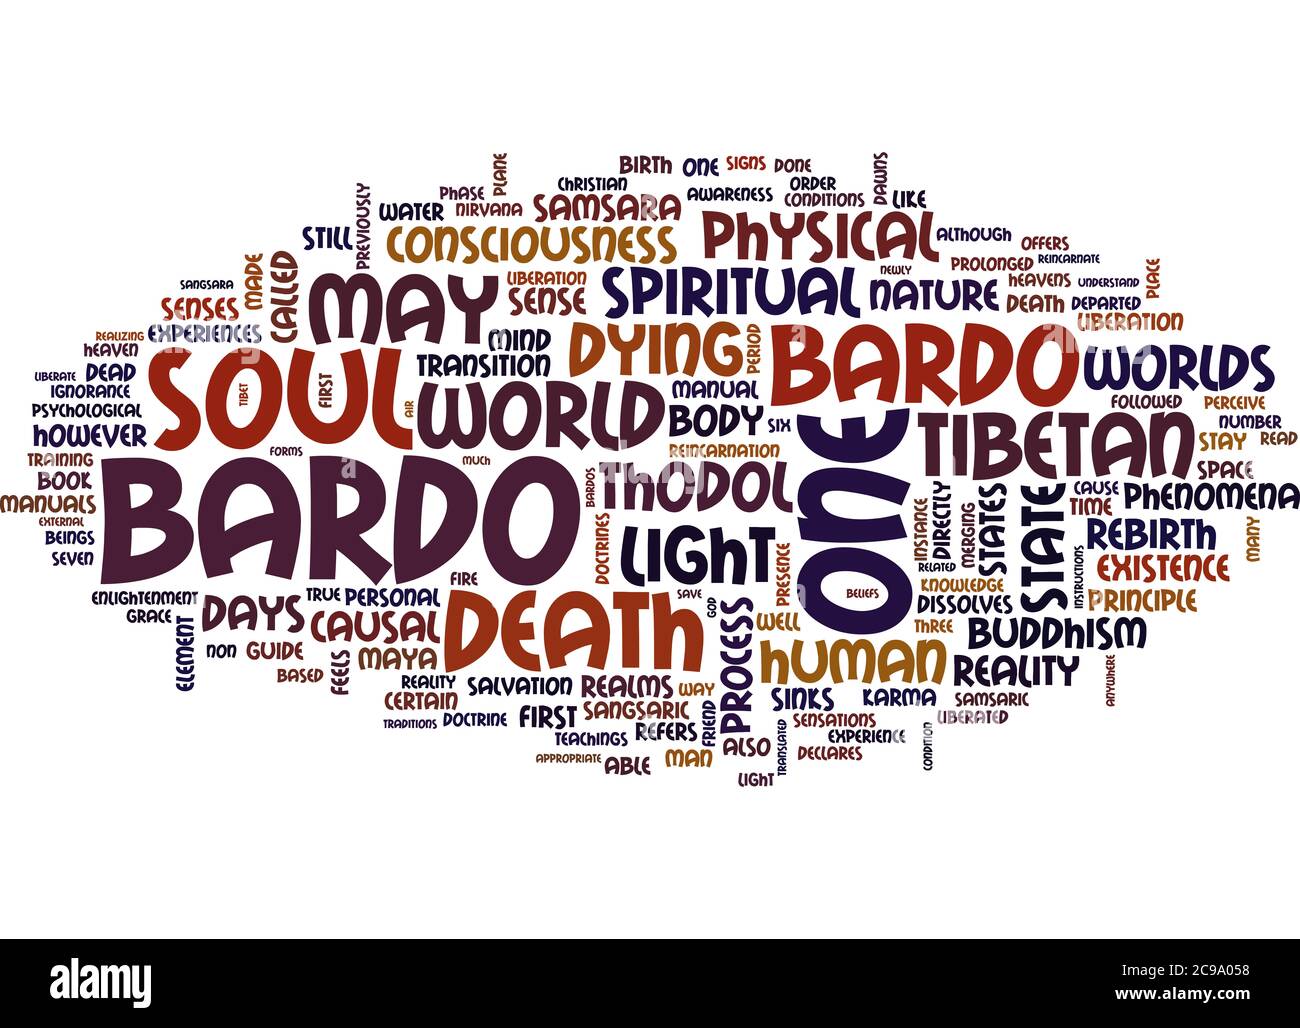 Word Cloud Summary Of Article The Metaphysical View Of Death And Life After Death Part 6 Stock Photo Alamy